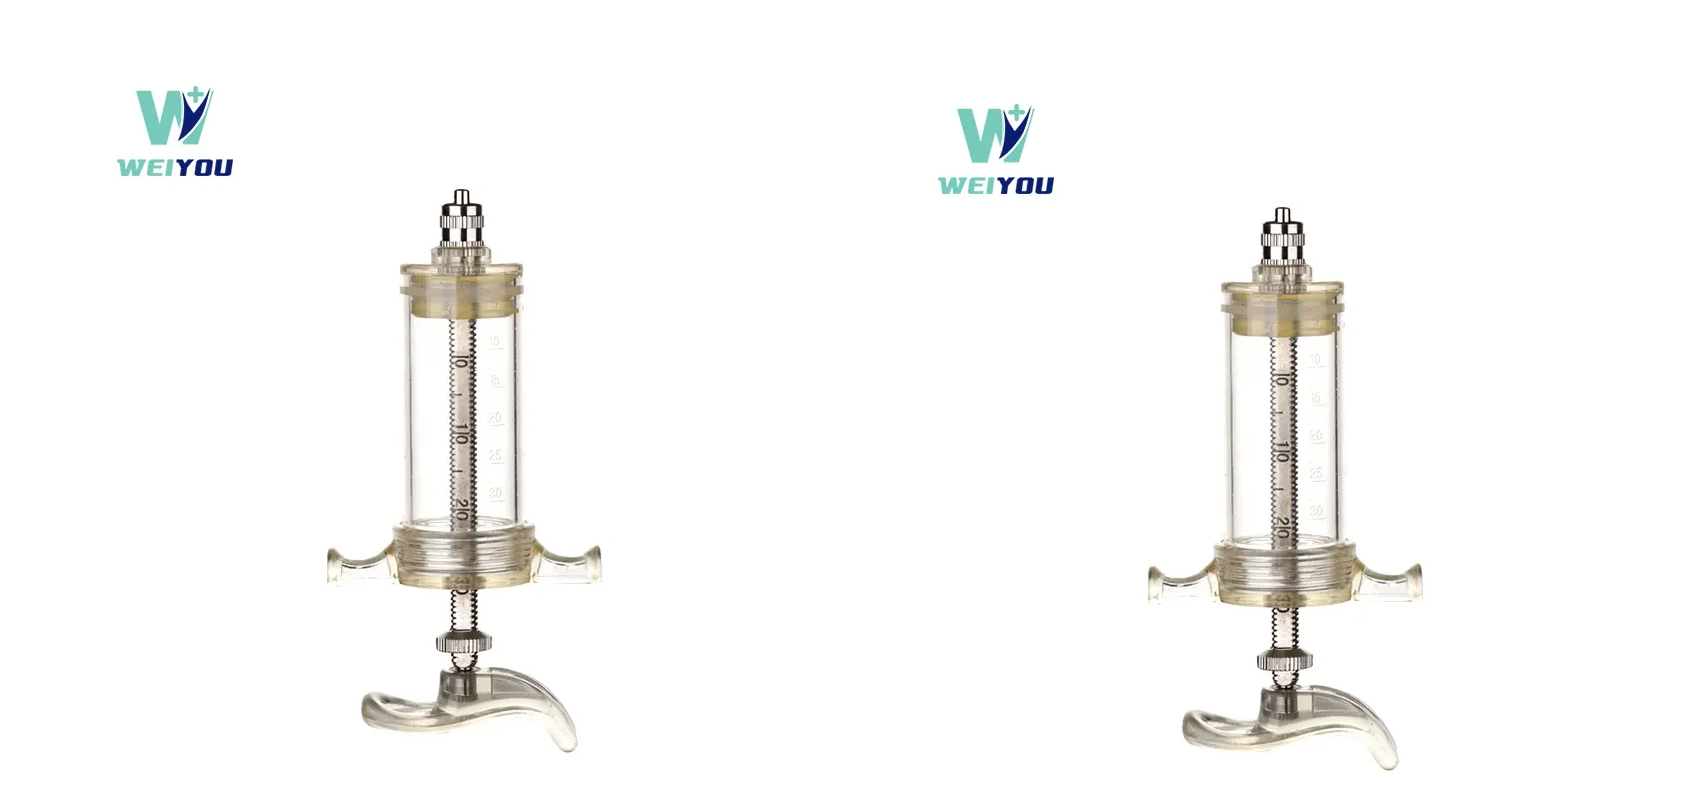 Application of Plastic-Steel Veterinary Syringes in Aquaculture Industry